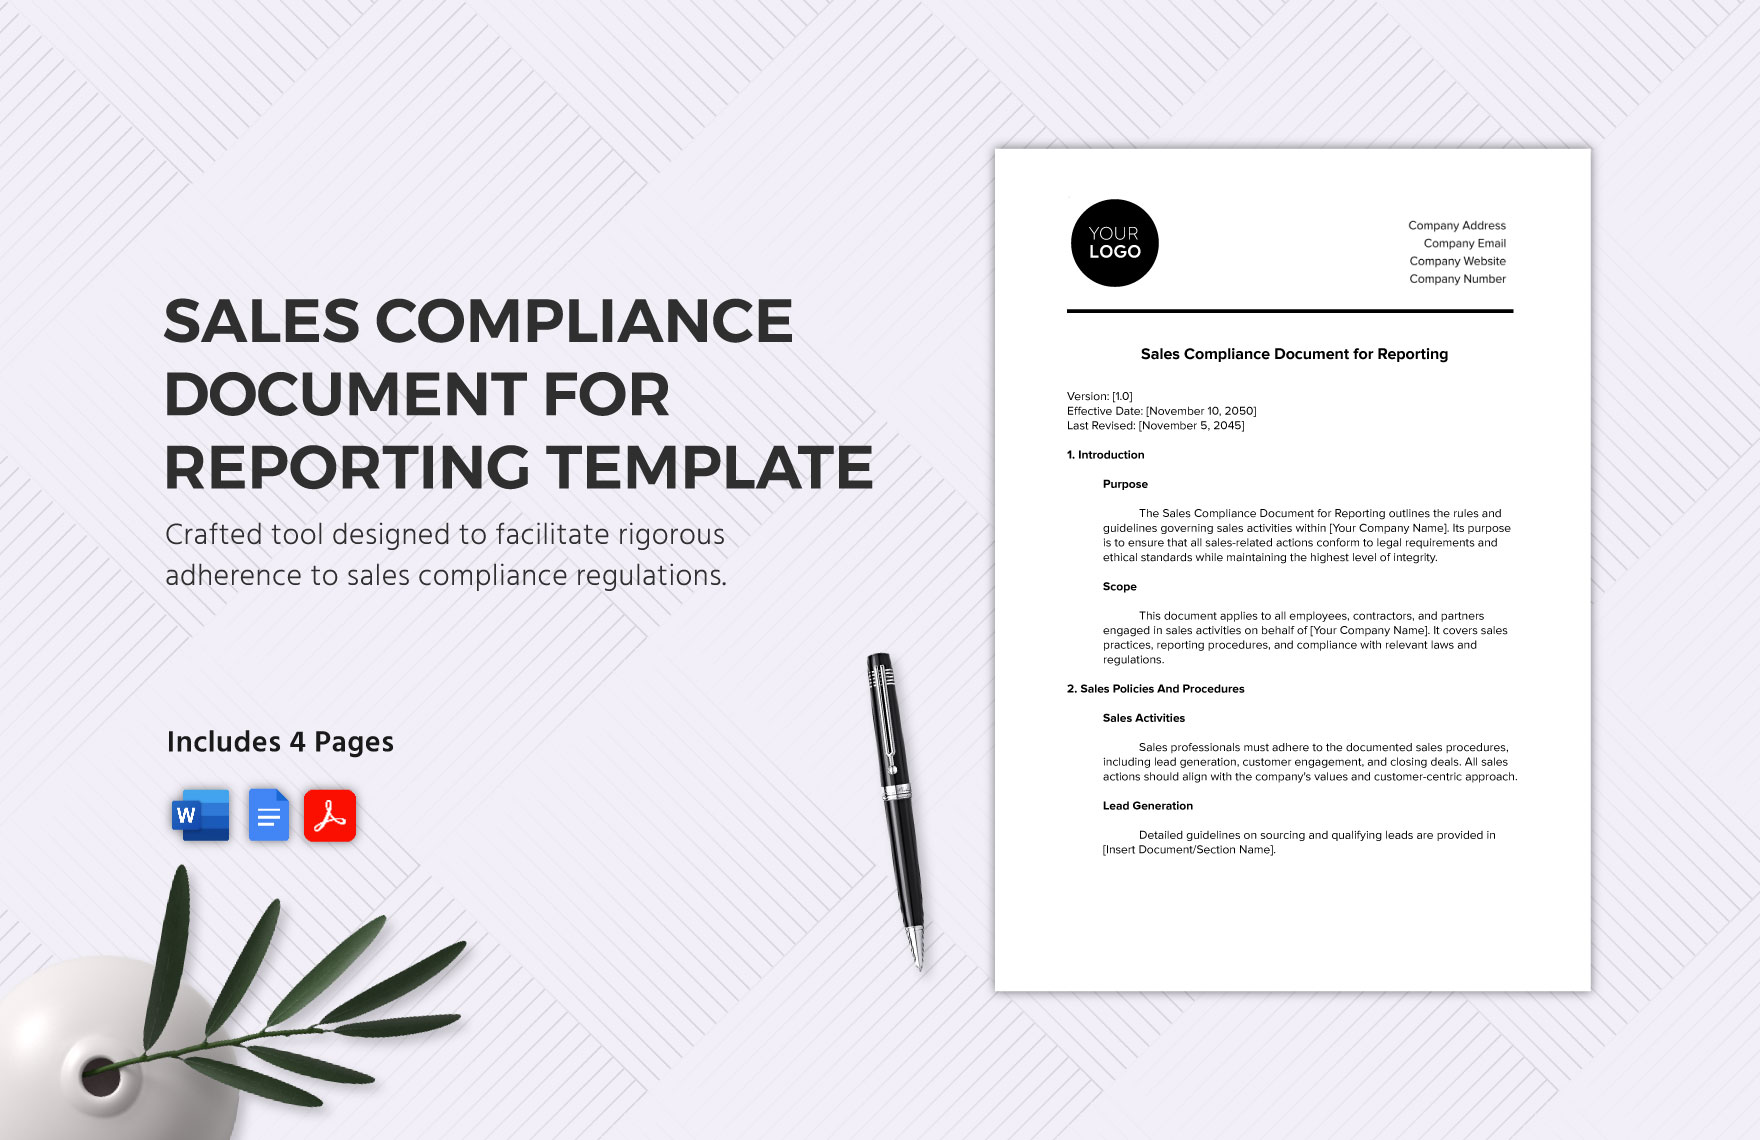 Sales Compliance Document for Reporting Template